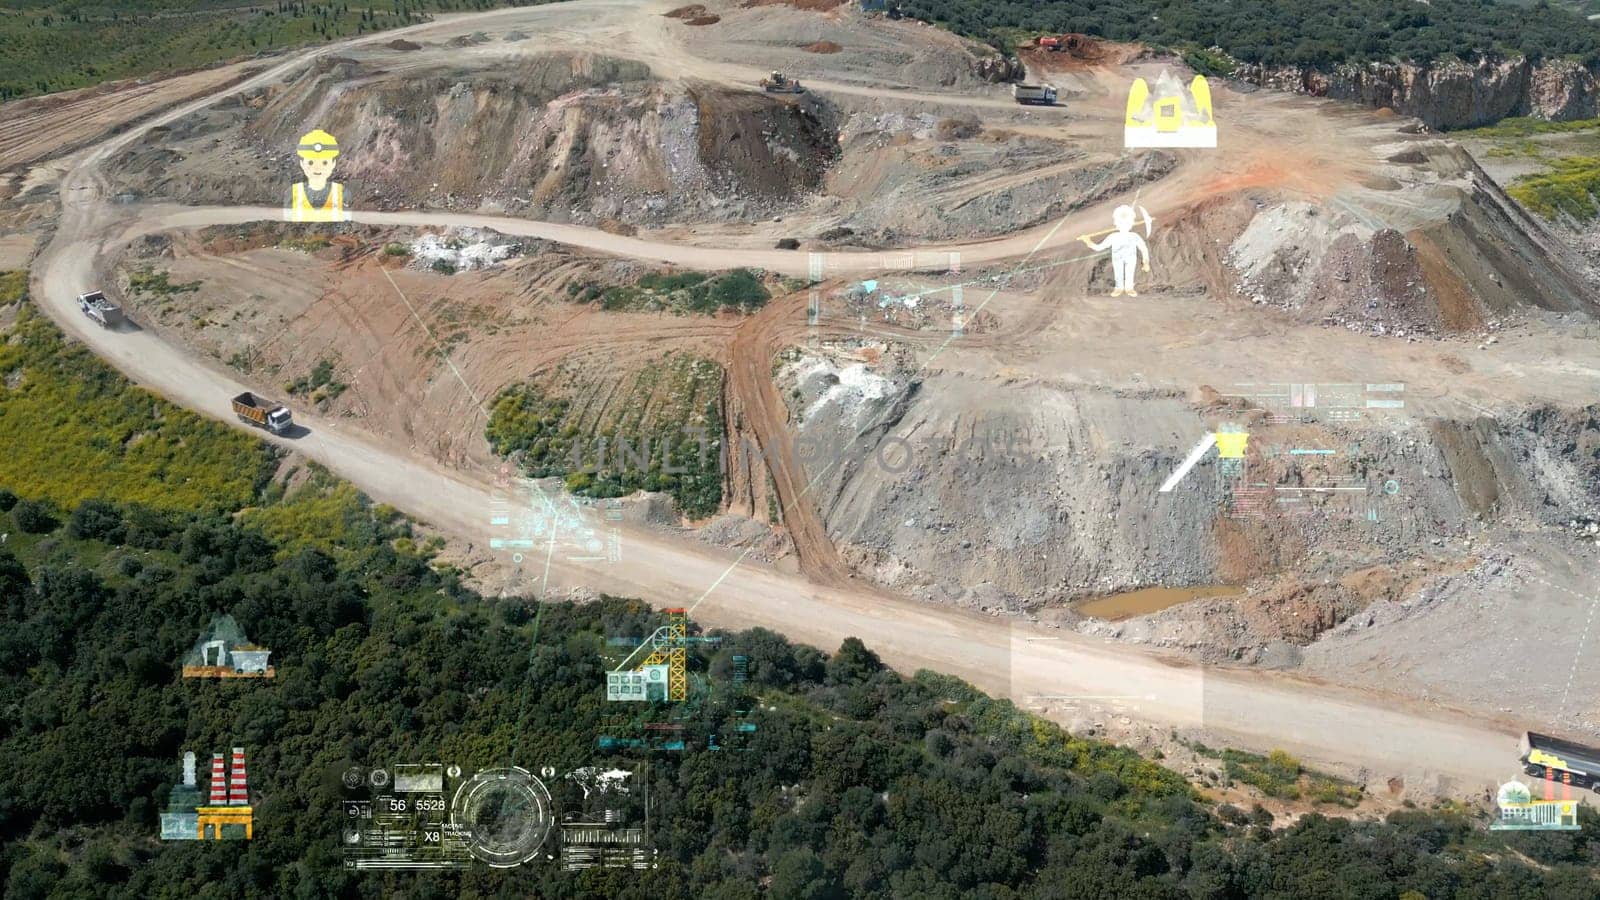 aerial view shot mining, dumpers, quarrying extractive industry stripping work. Big Mining Trucks. View from drone at opencast mining with lots of machinery trucks. High quality photo